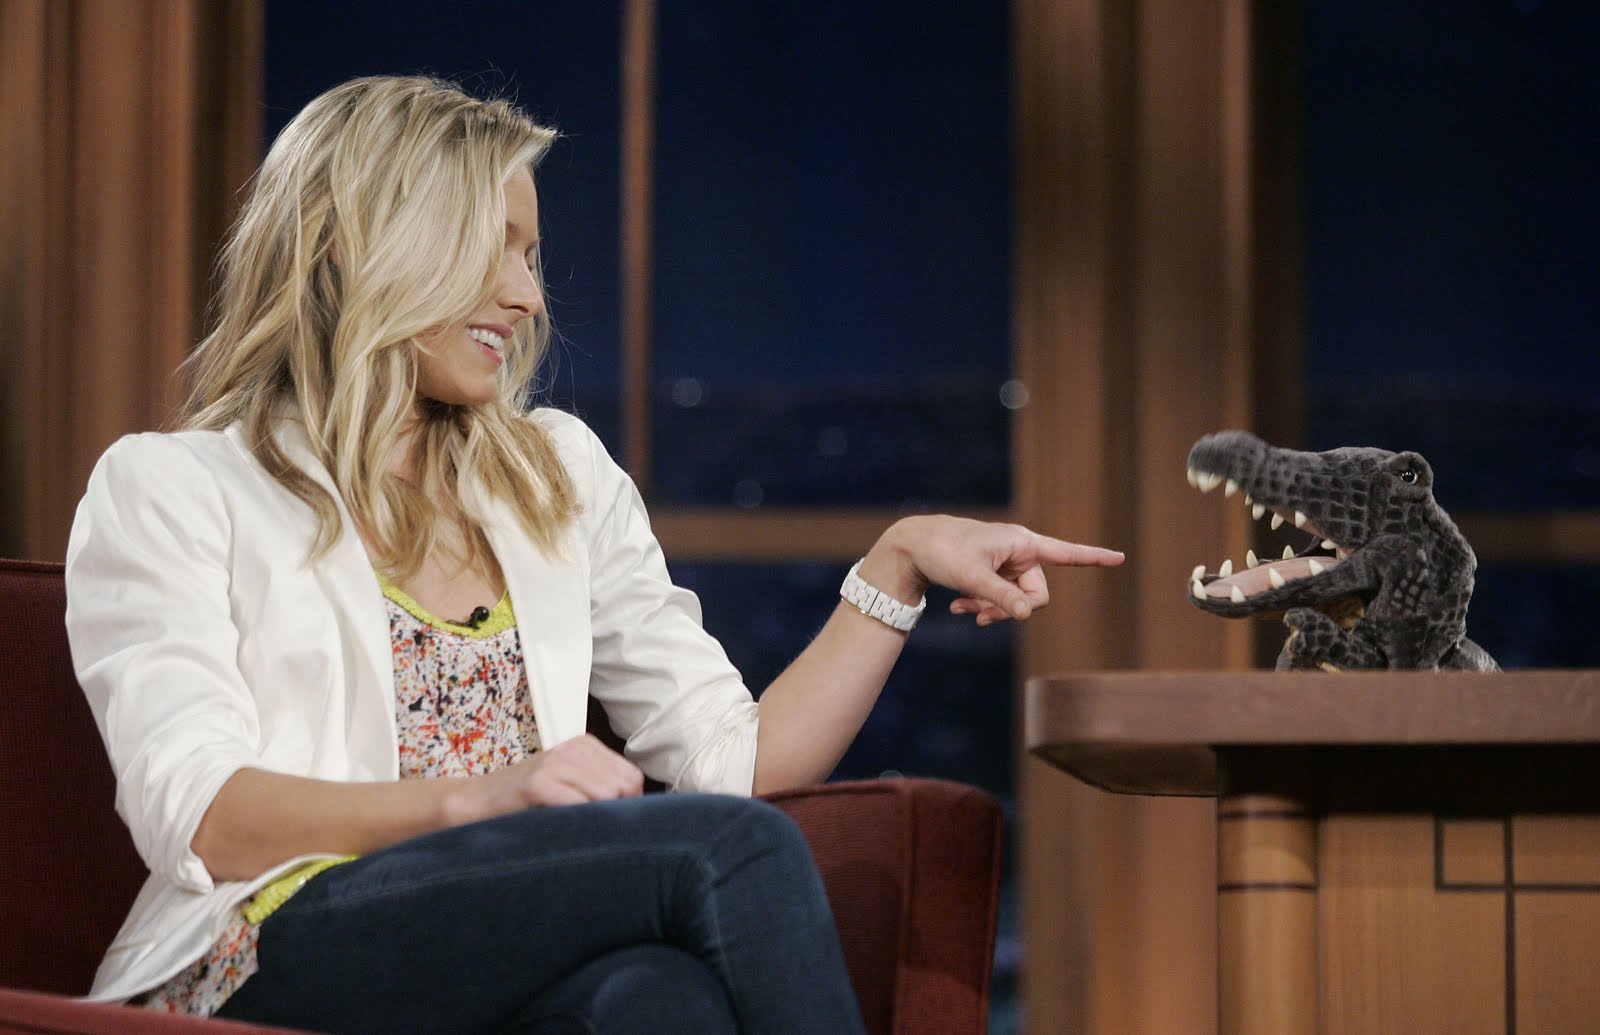 [17077_kristen_bell_the_late_late_show_021209_09_122_456lo.jpg]